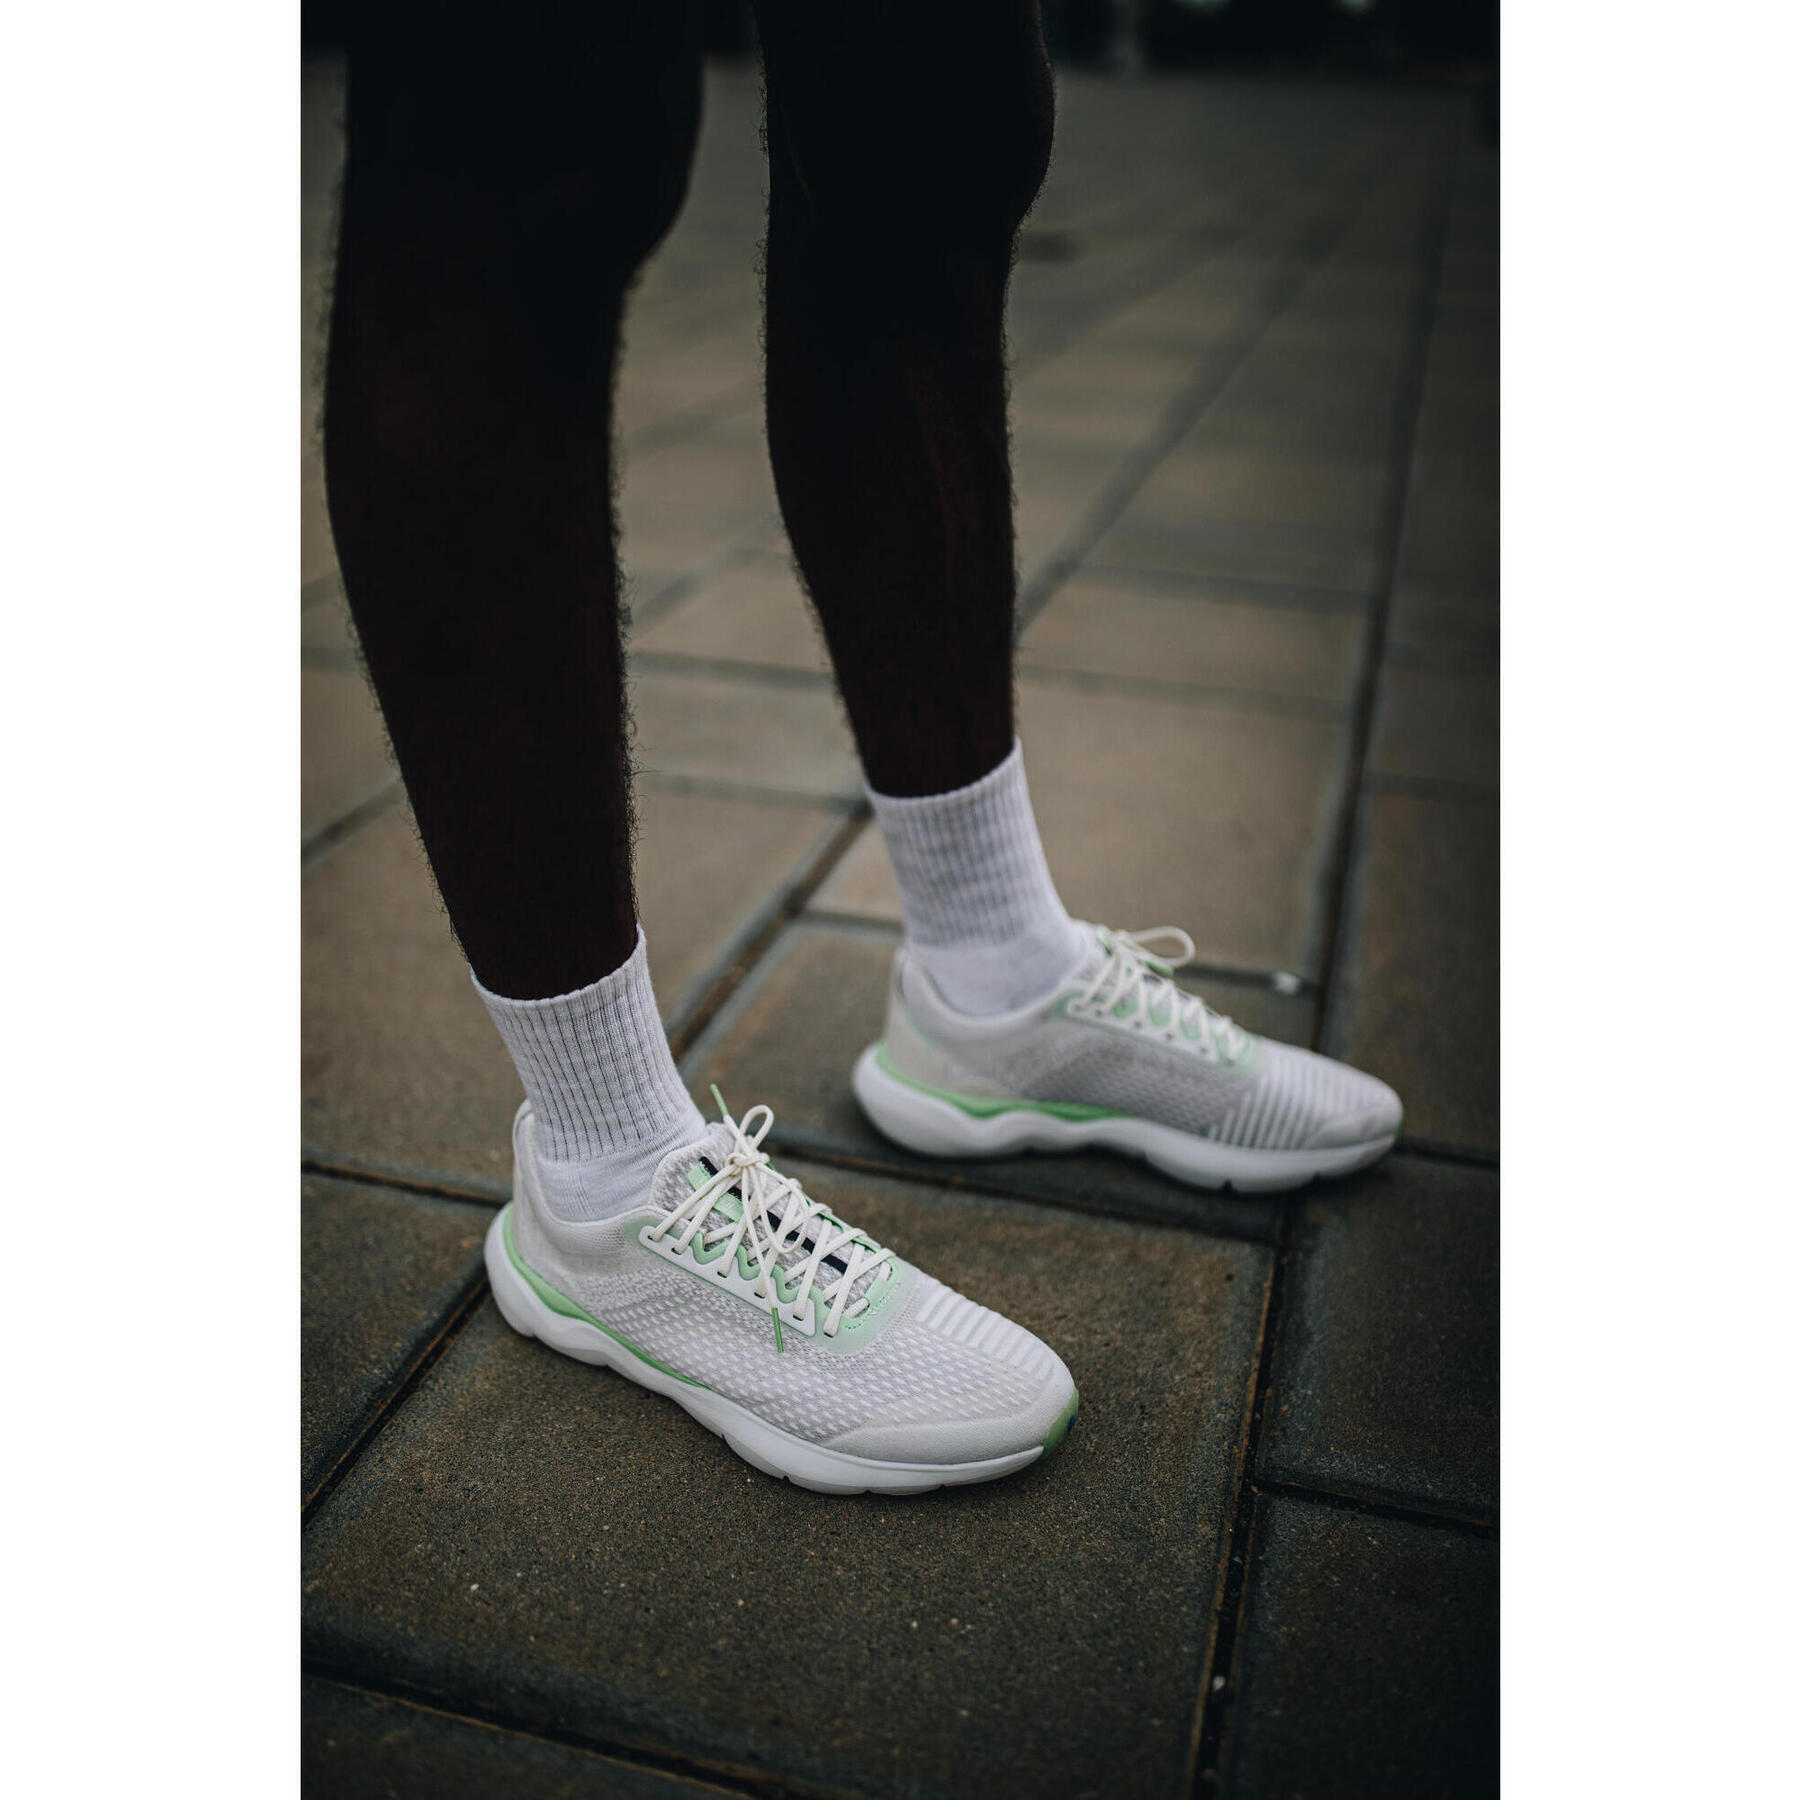 Refurbished Mens running shoes - Light Green and Off-White - A Grade 7/7